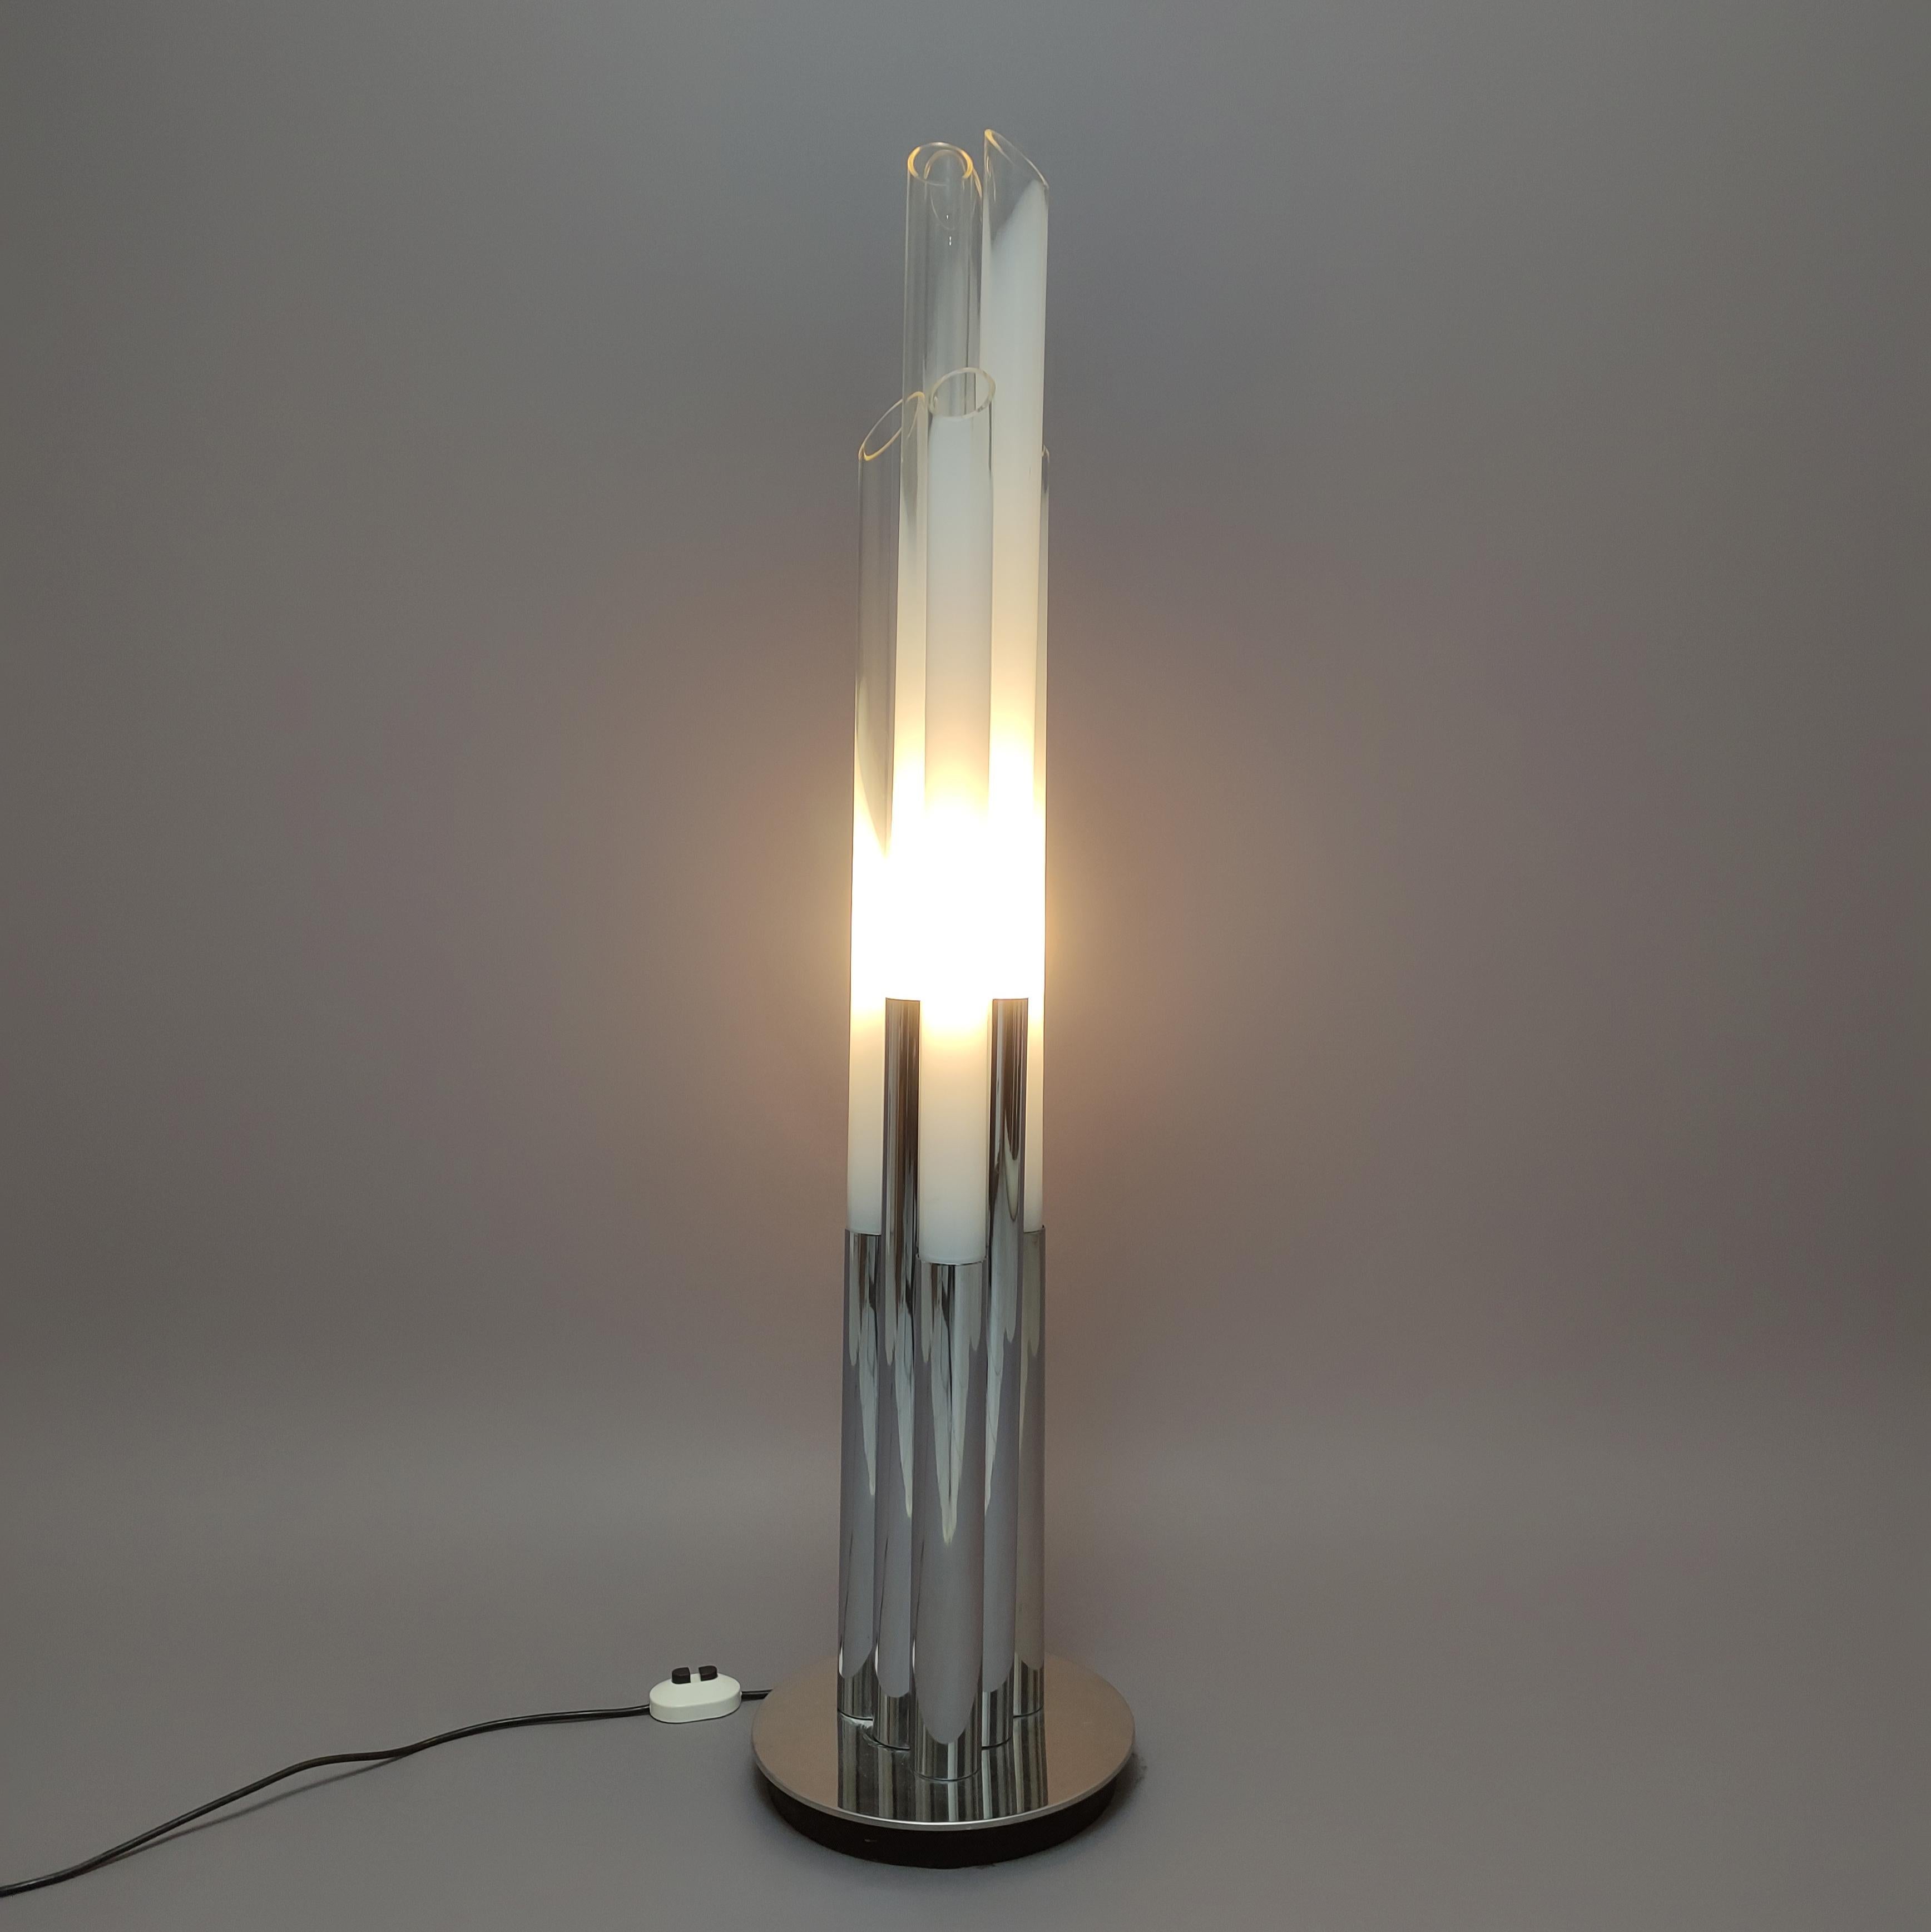 This Is a rare Mazzega floor lamp, mod. Canne, design by murano master Carlo Nason .
His legendary works with sfumato glass Is known as one of the best Murano artist, with awesome works like Mazzega LT series.

This rare model have six canne sfumato